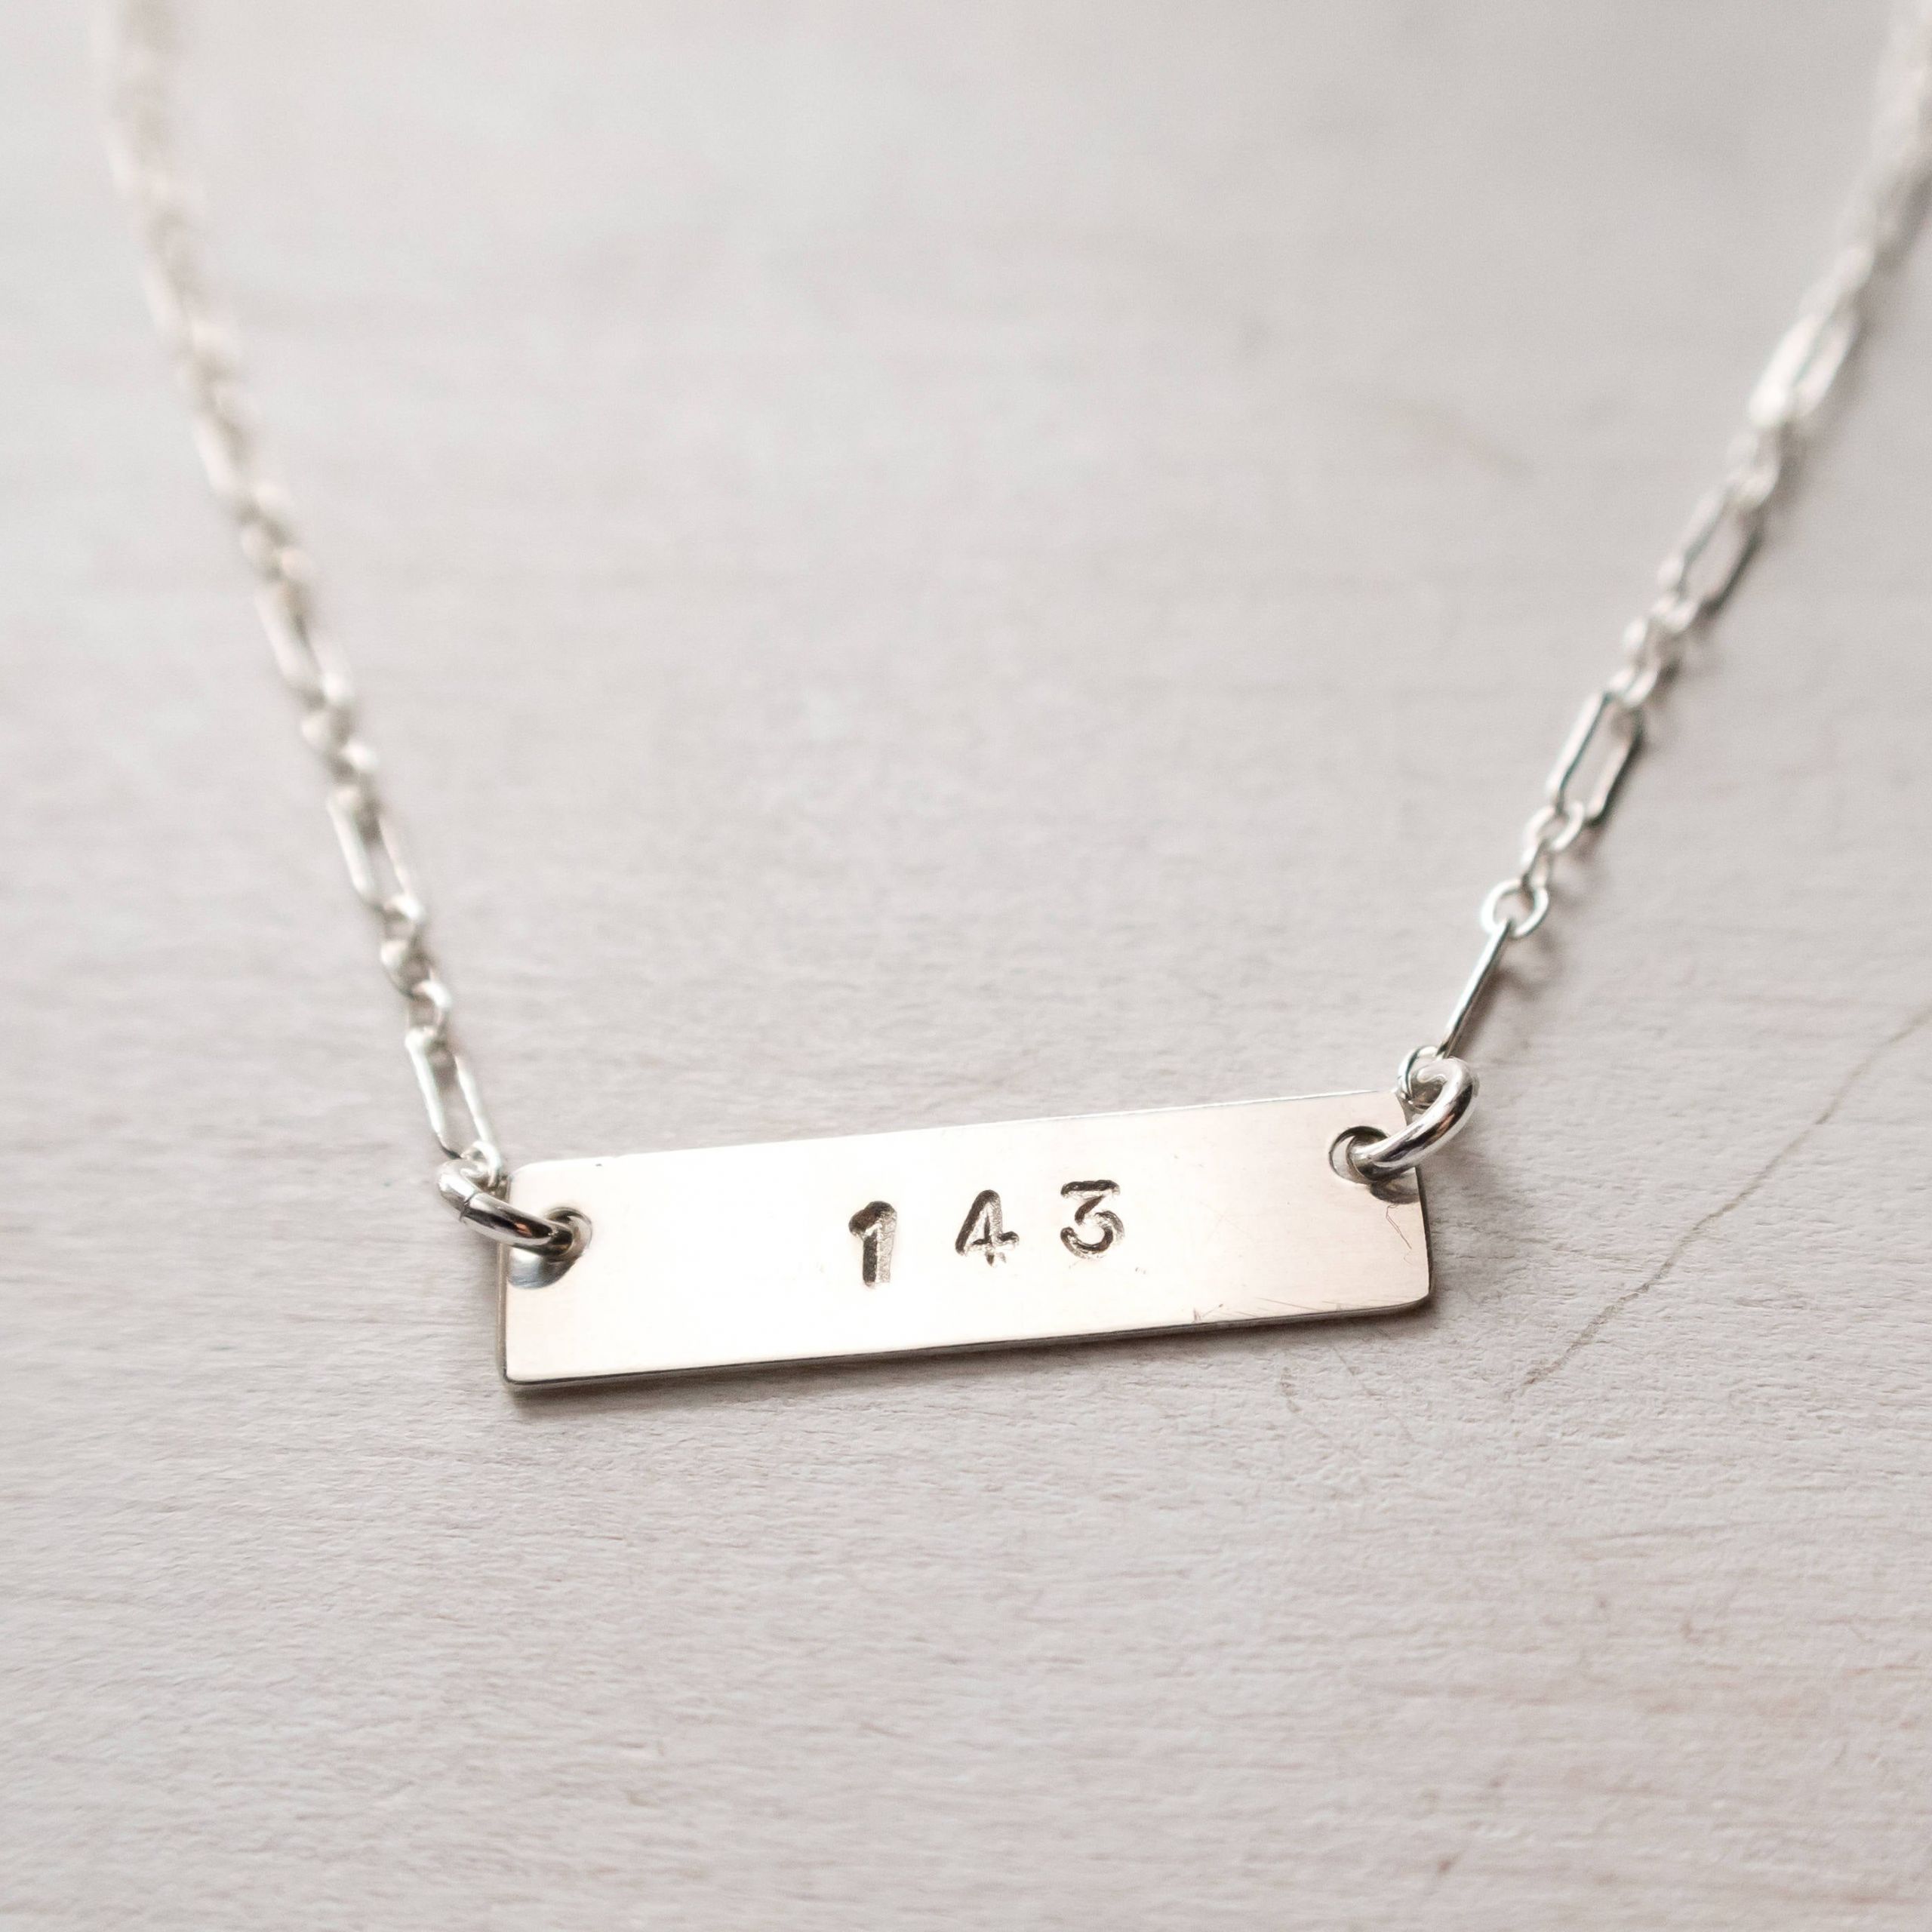 I Love You Necklace For Girlfriend
 I Love You 143 Necklace Horizontal Bar Necklace Choker